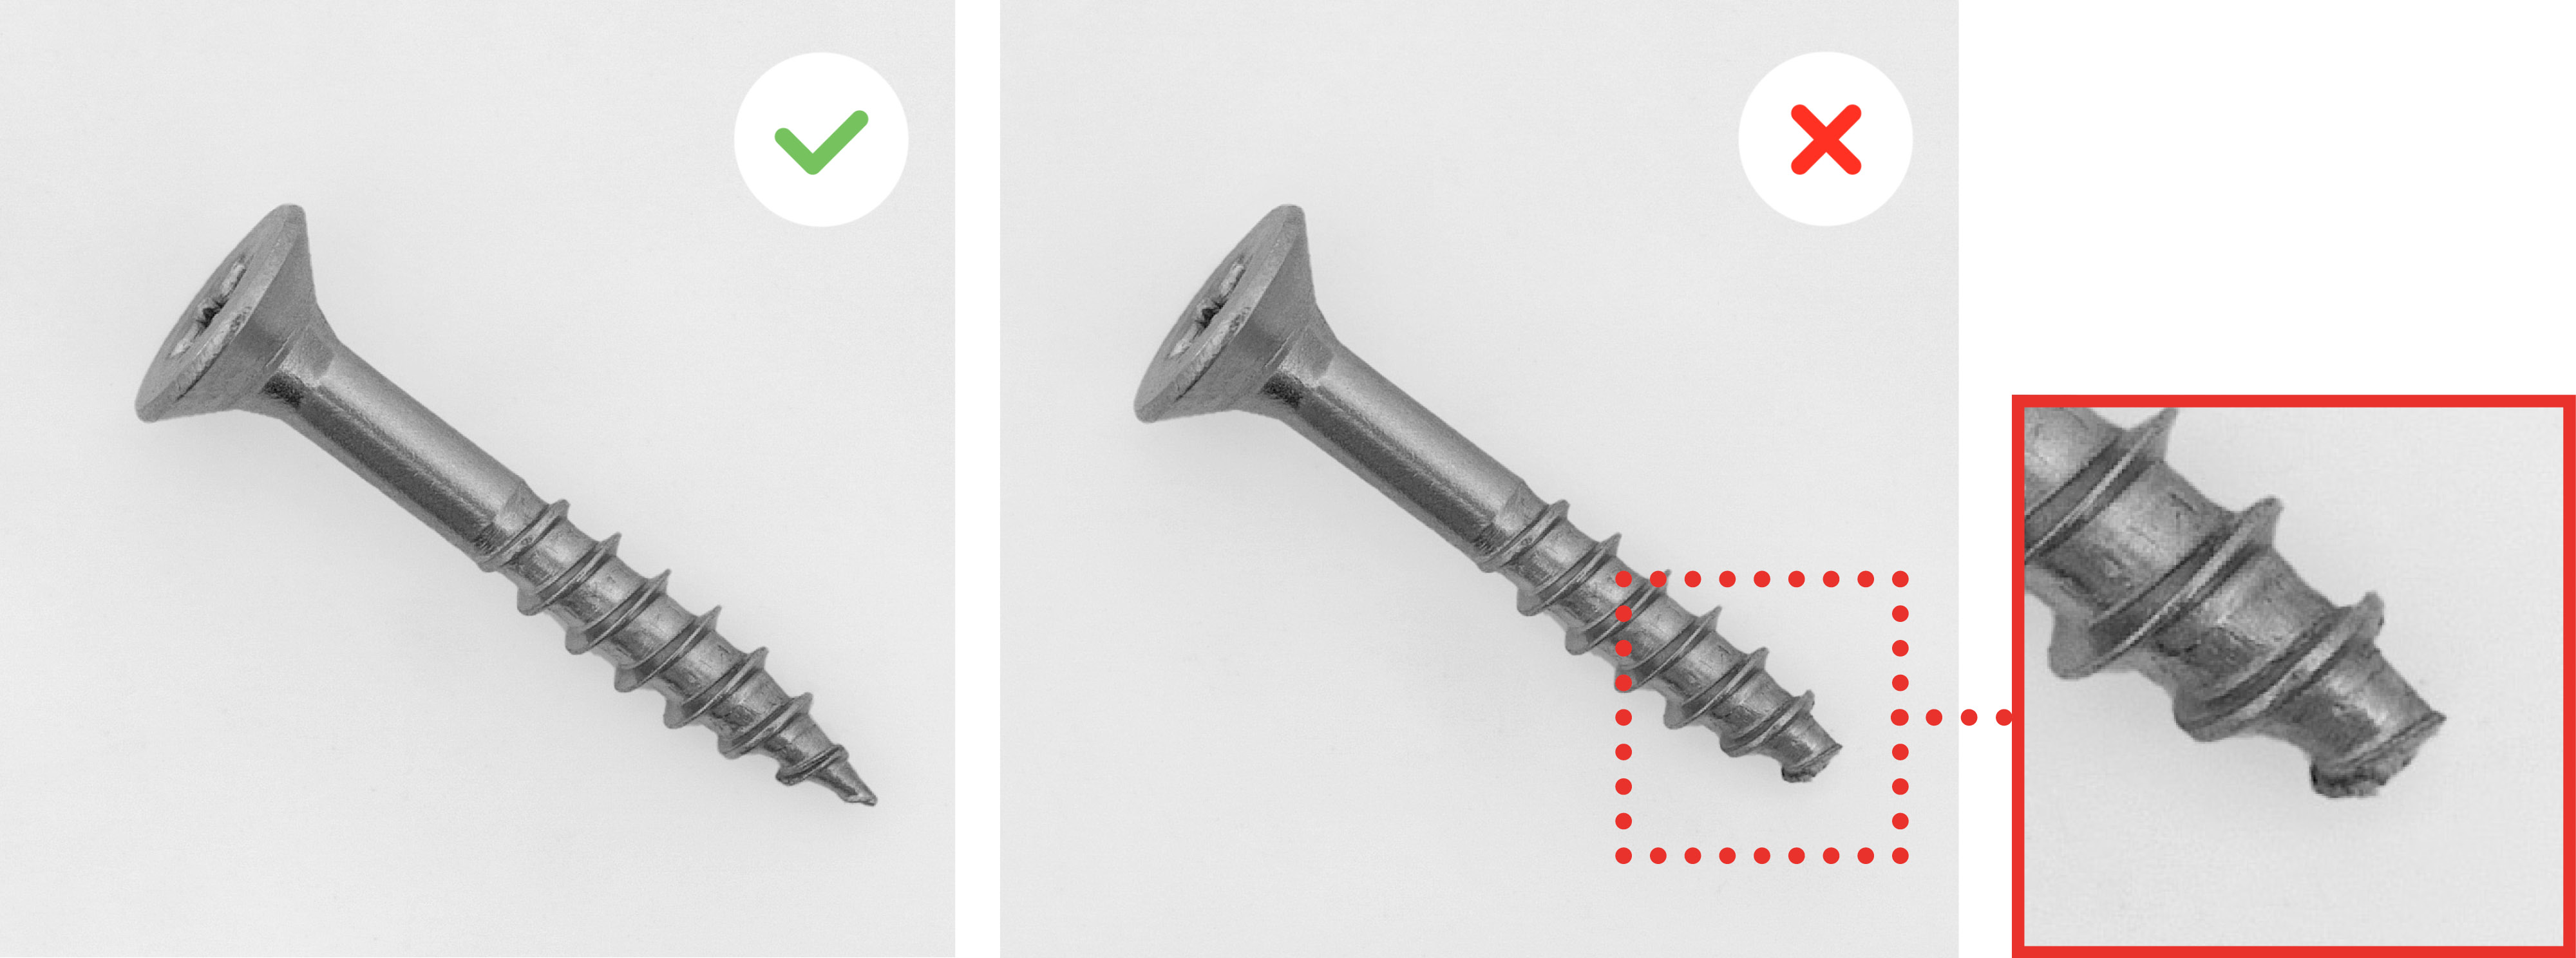 Using AI-based image recognition, defective screws can be identified.